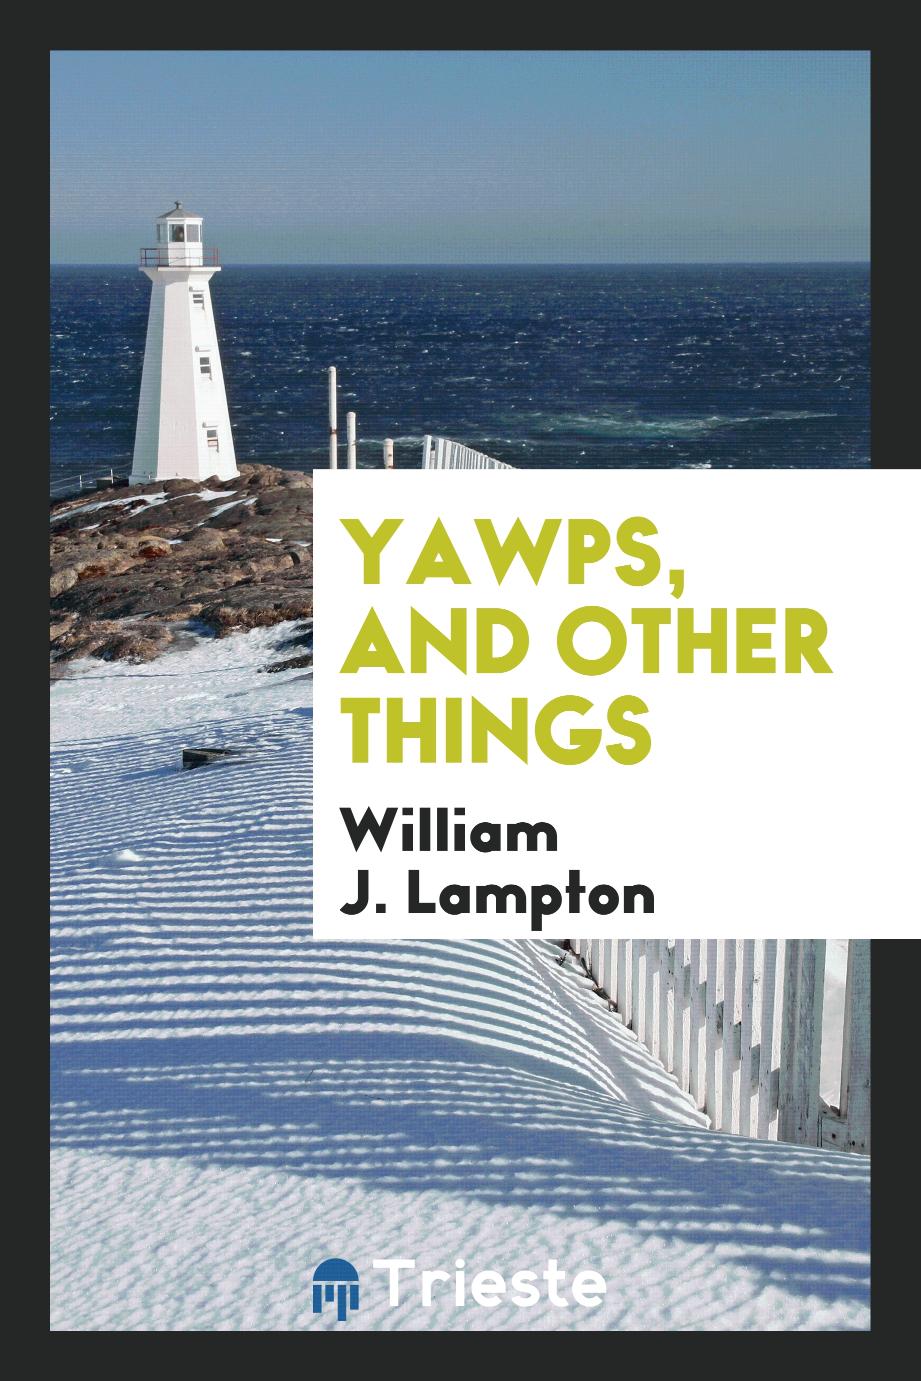 Yawps, and other things